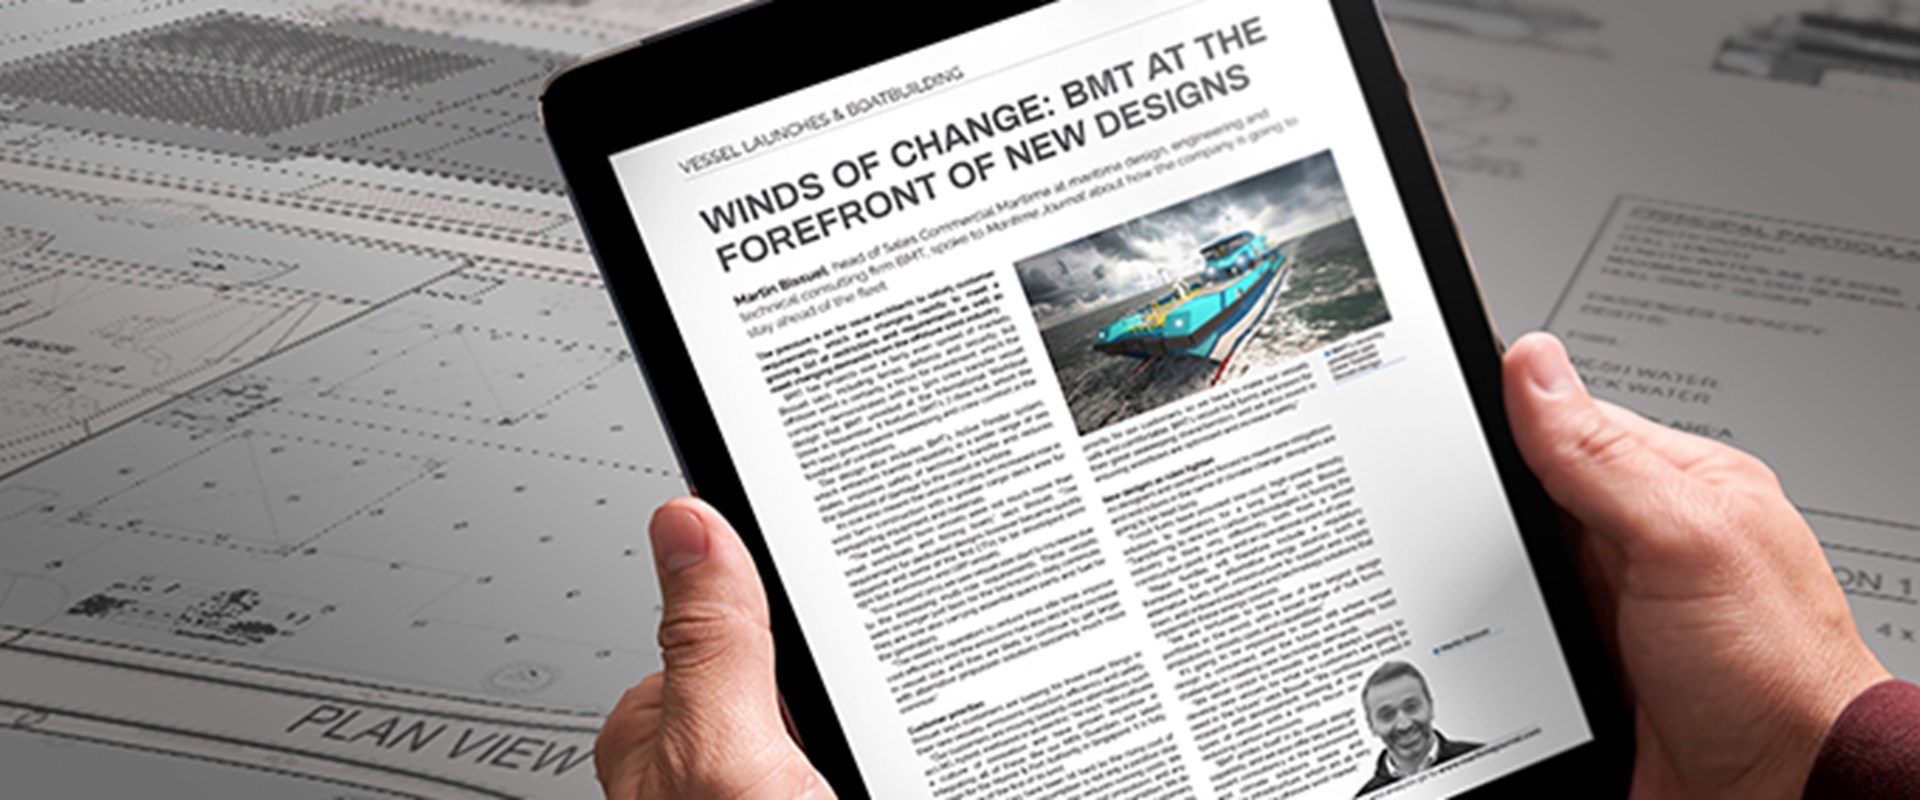 BMT at the forefront of new designs - Maritime Journal